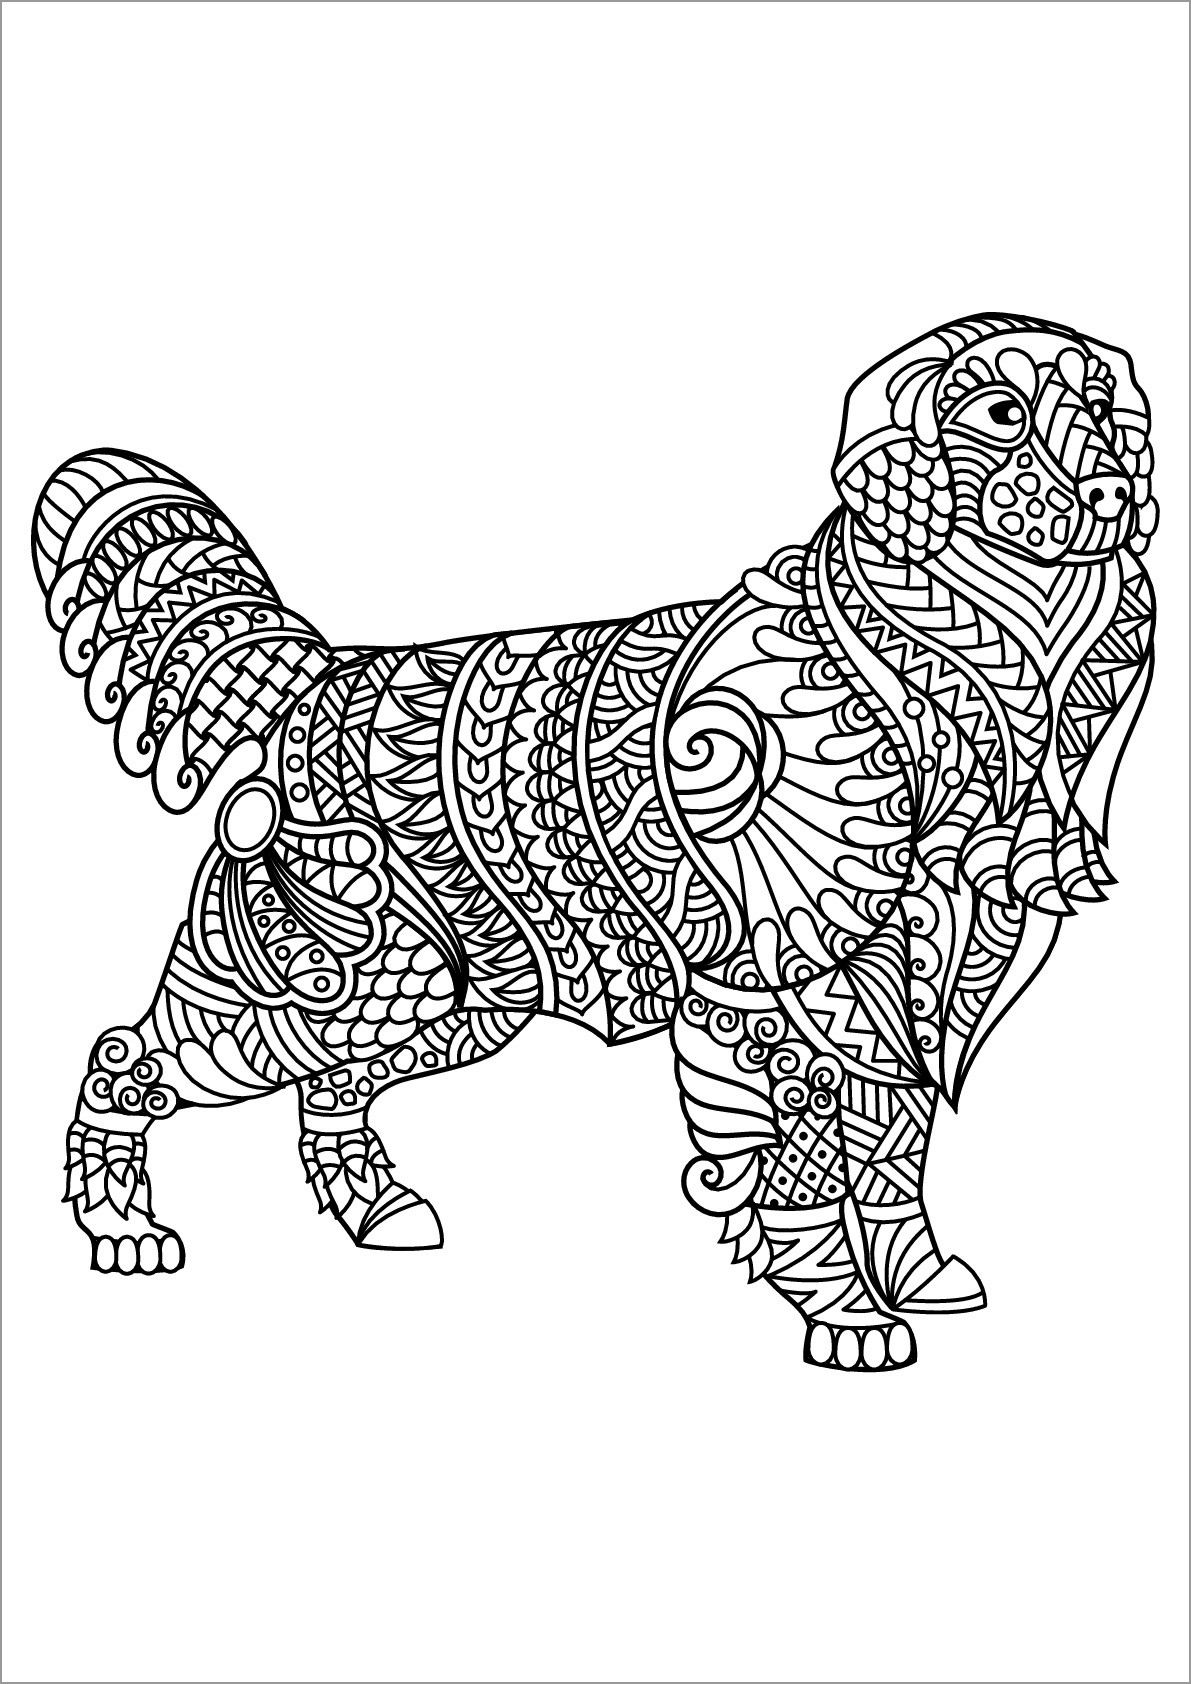 Labrador Dog Coloring Pages for Adults